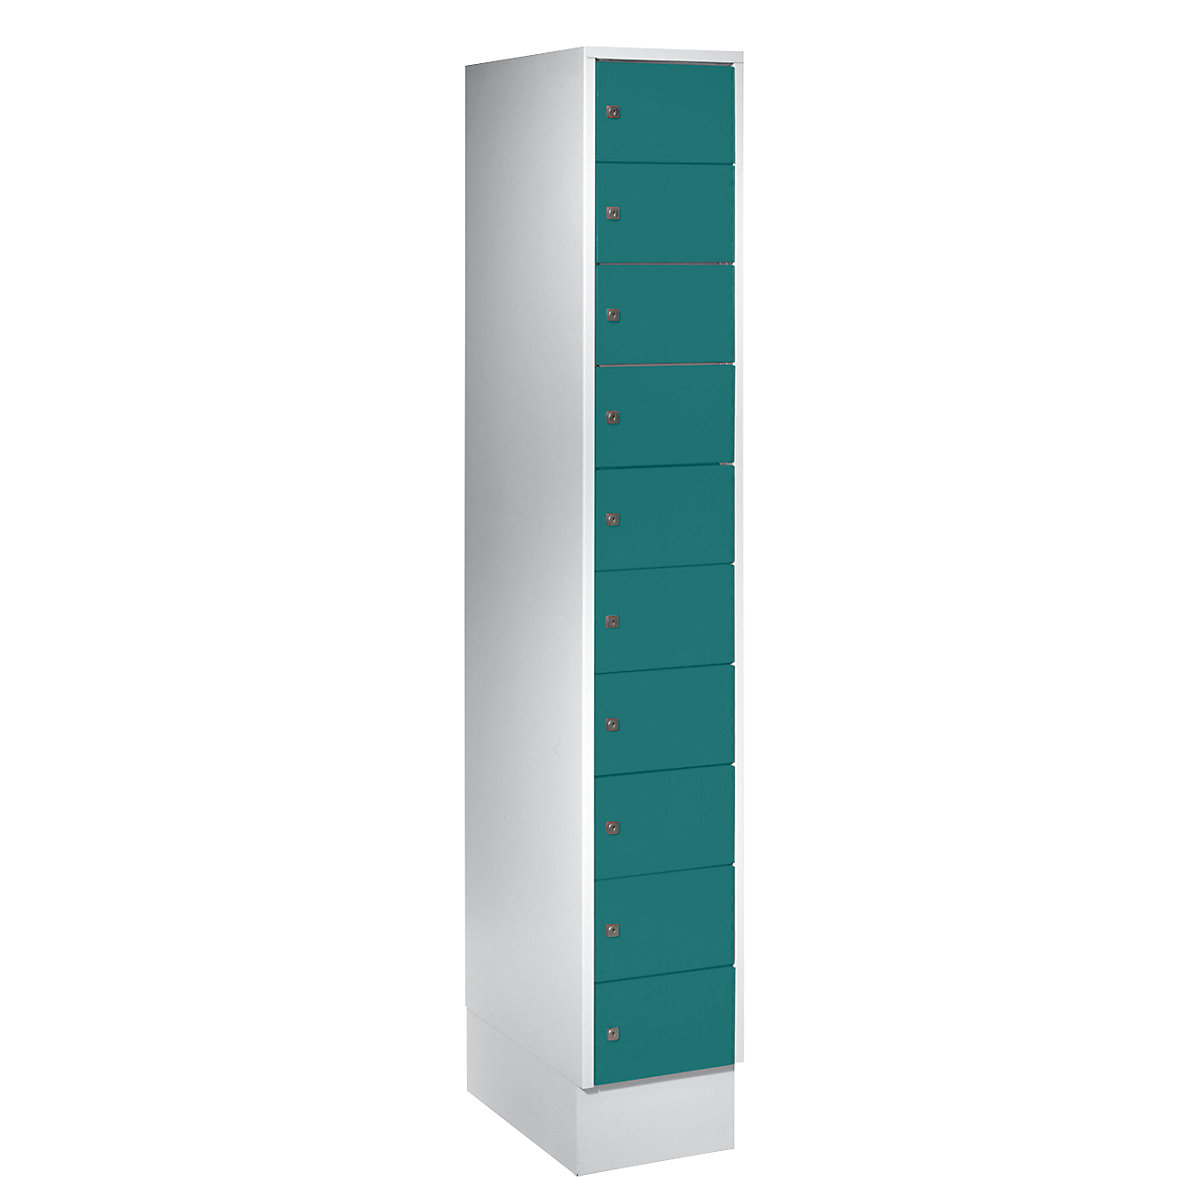 Small locker cupboard – Wolf, 10 compartments, HxW 1850 x 300 mm, door colour opal green RAL 6026